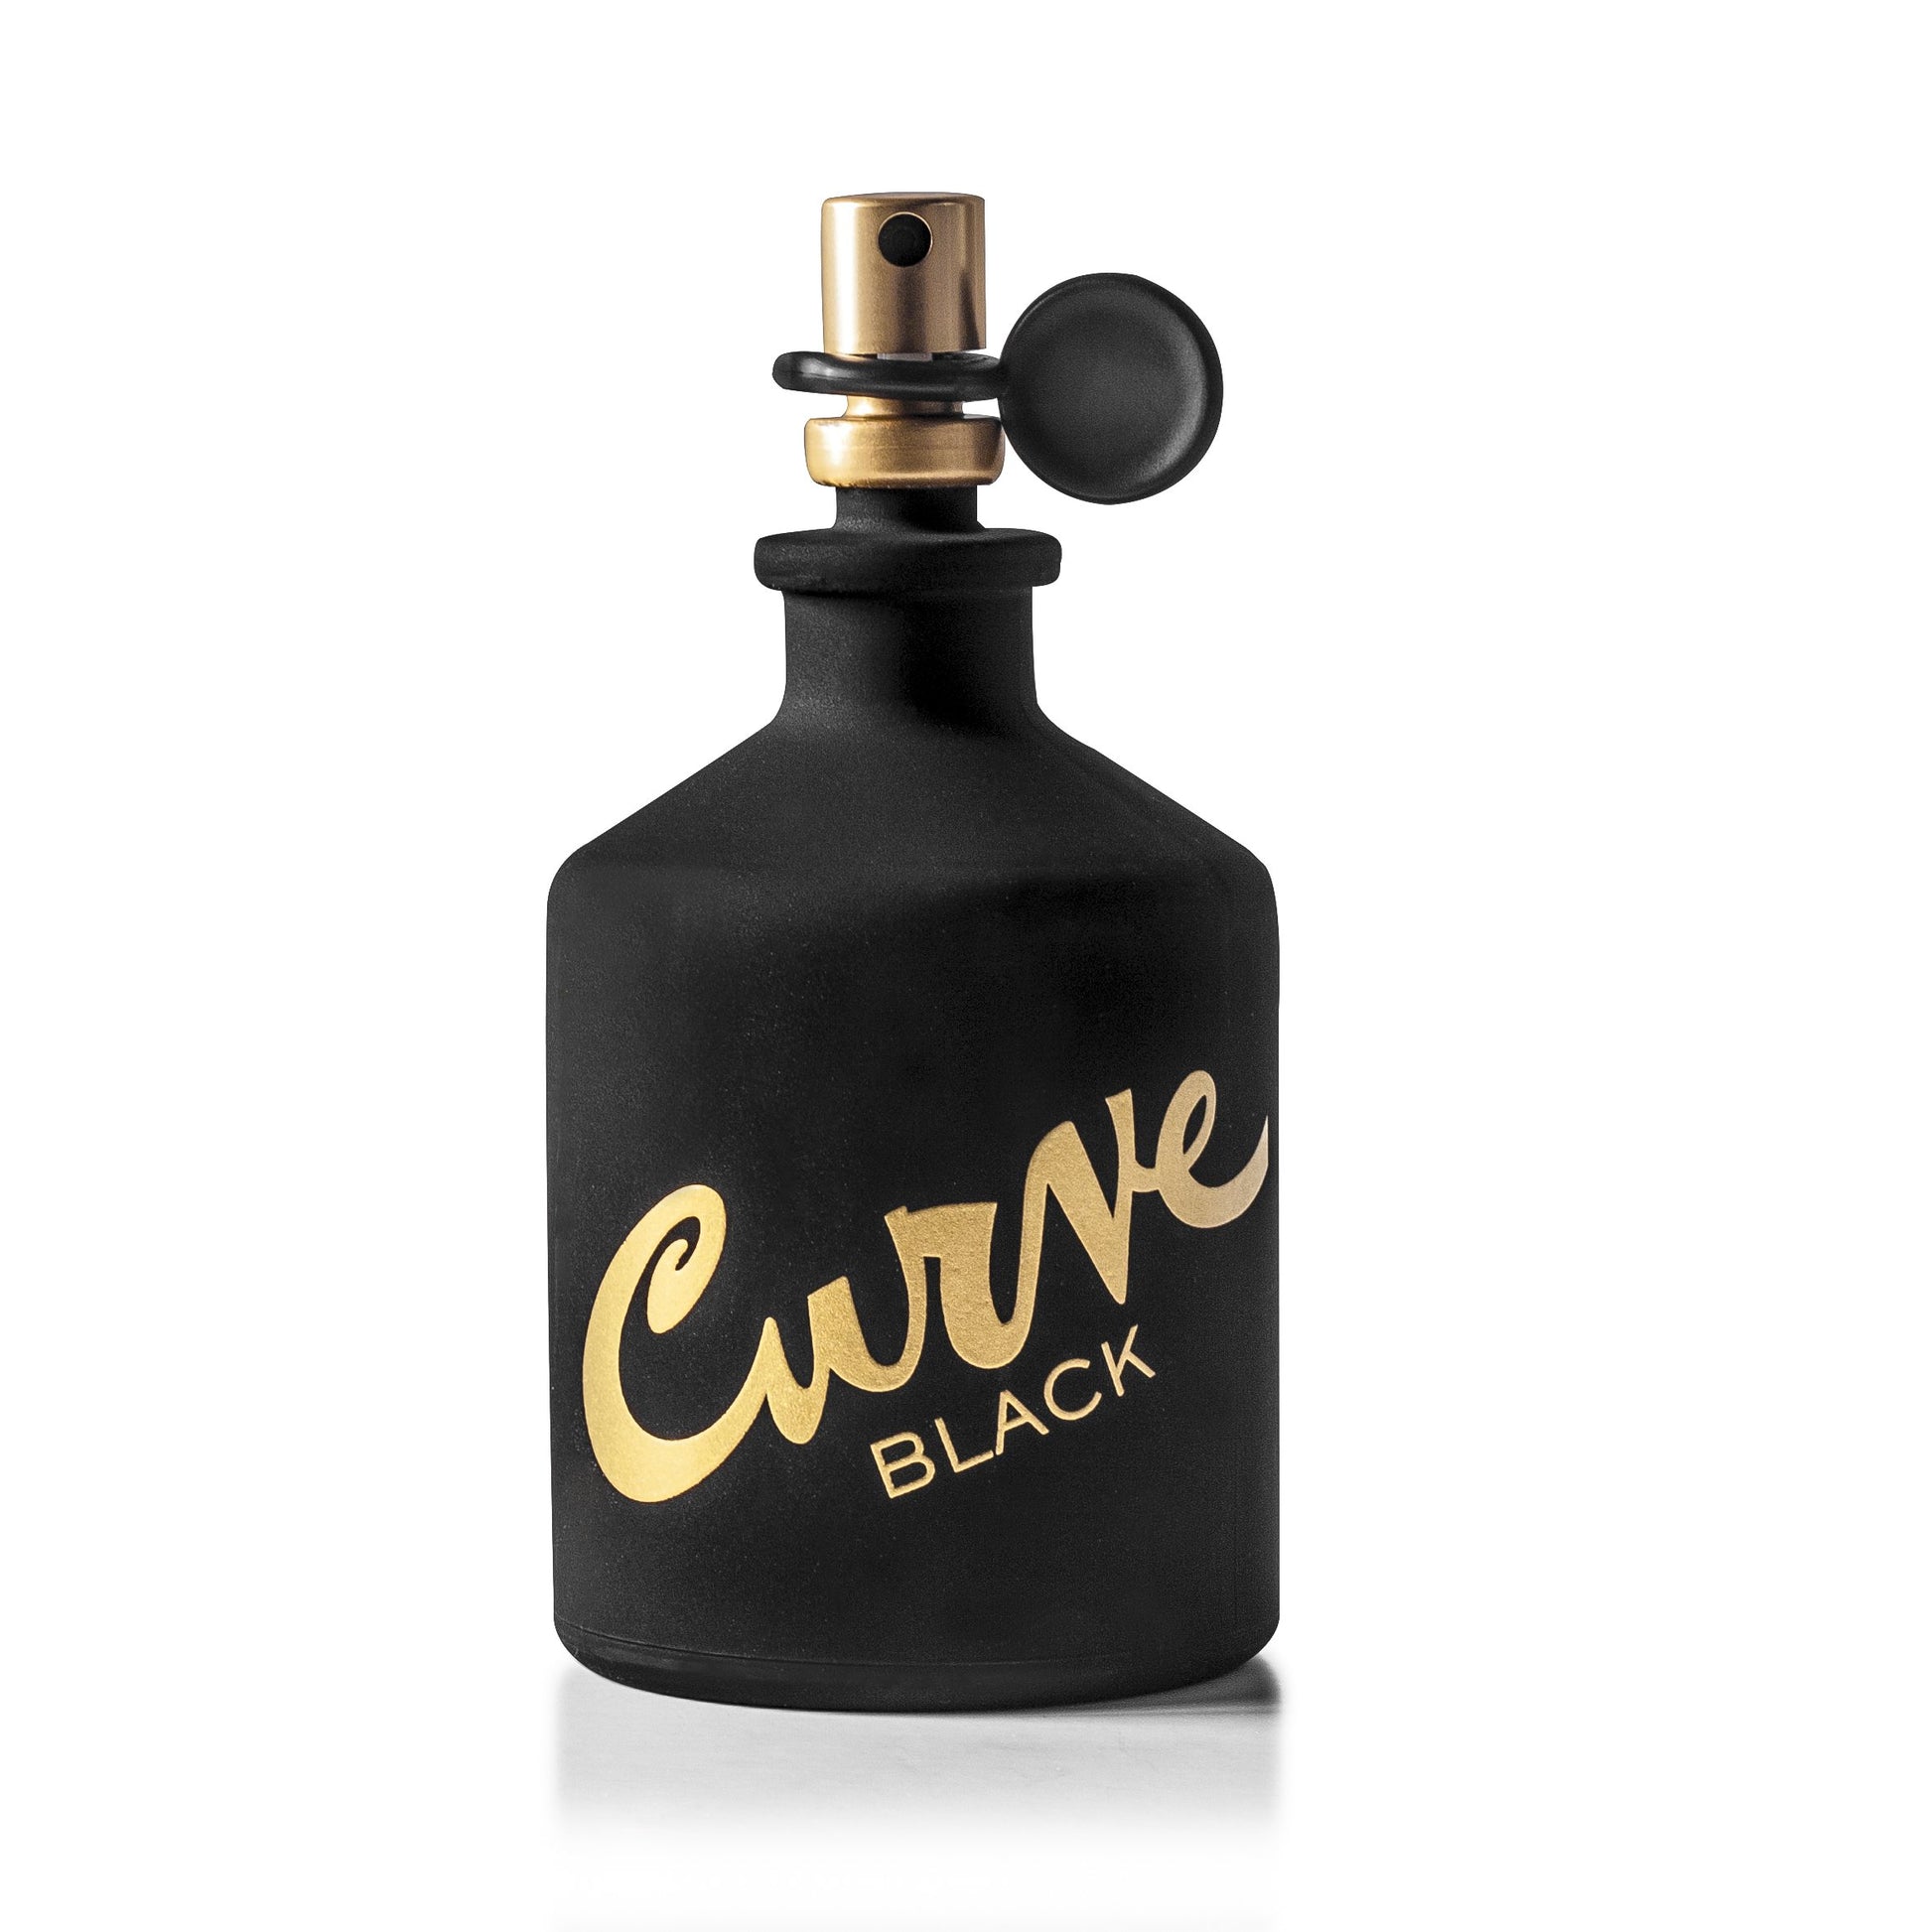 Curve Black Cologne Spray for Men by Claiborne, Product image 4